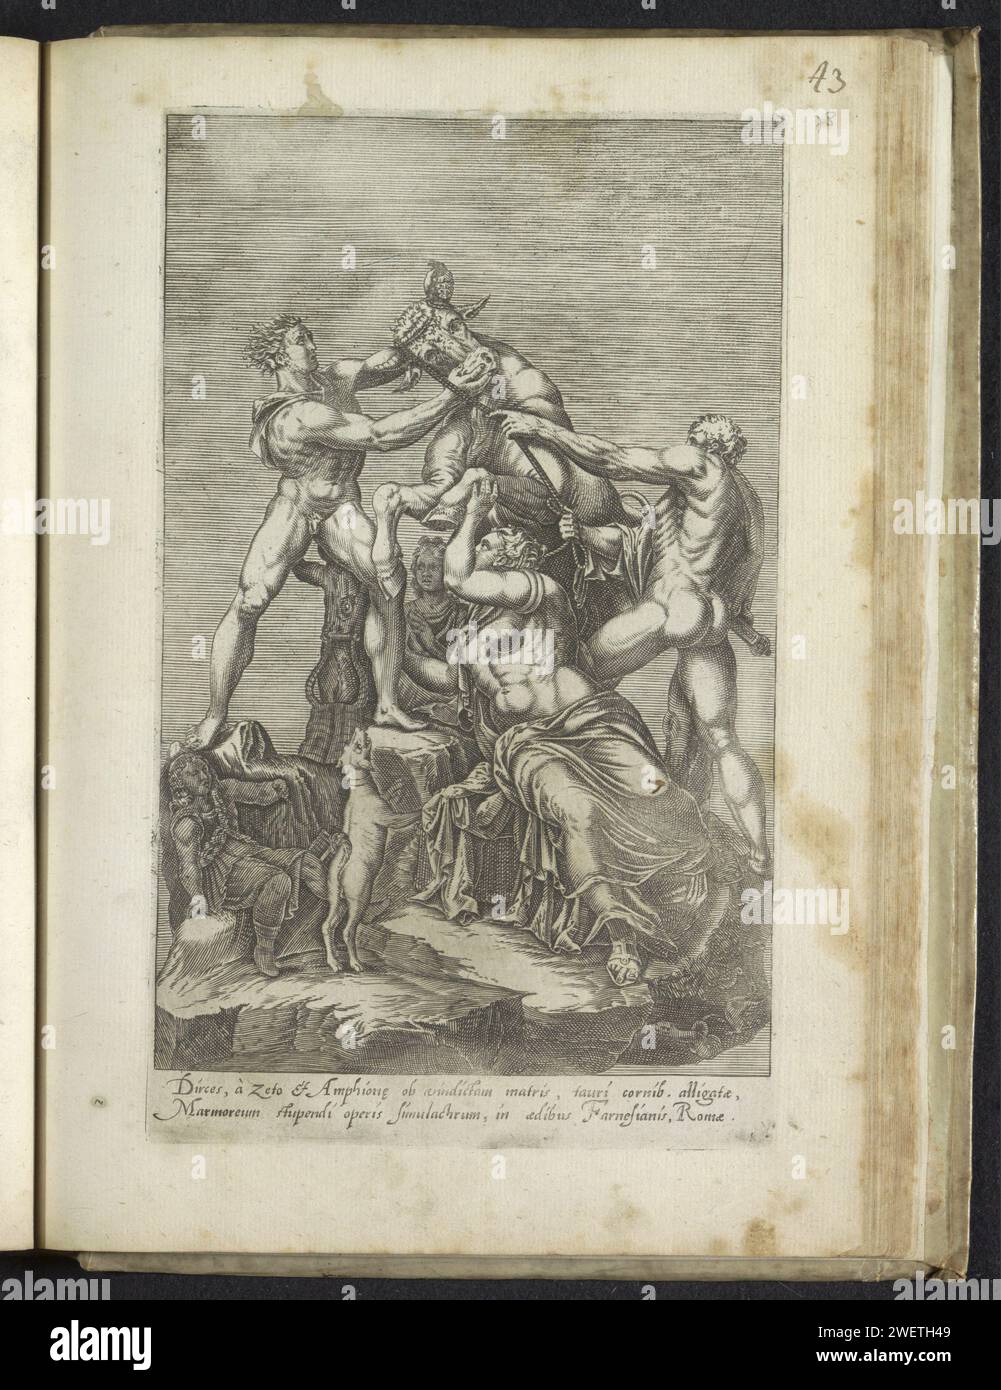 DIRce sculpture bound to a bull, Anonymous, 1584 print Antique sculpture known as the Farnese bull. The Amphion and Stehus brothers tie the braided hair of Dirce to the horns of a bull. Caption in Latin. Print is part of an album.  paper engraving piece of sculpture, reproduction of a piece of sculpture. Amphion and Zethus avenge their mother by tying Dirce to the horns of a bull Stock Photo